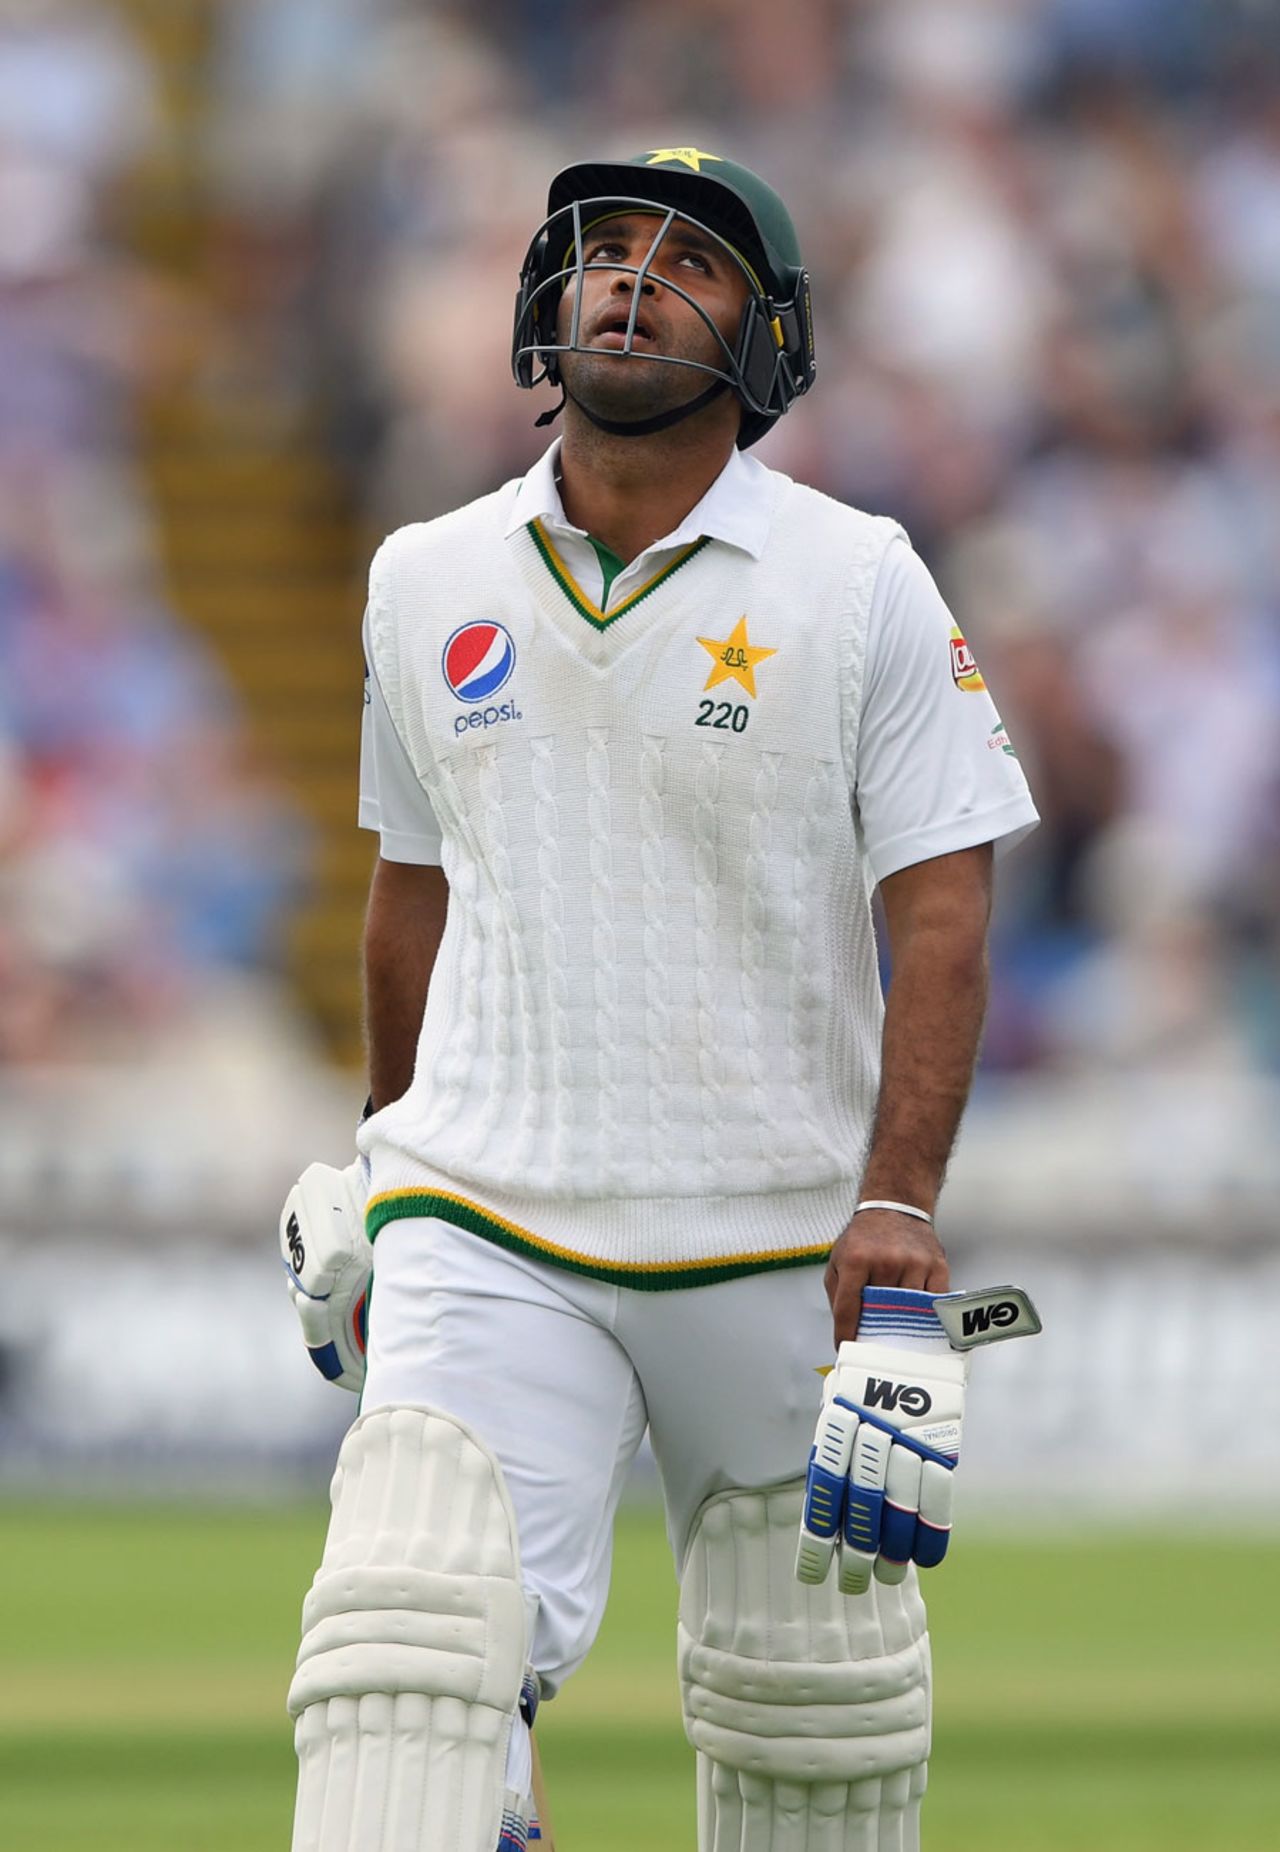 Sami Aslam made his highest Test but couldn't hide his disappointment, England v Pakistan, 3rd Investec Test, Edgbaston, 2nd day, August 4, 2016